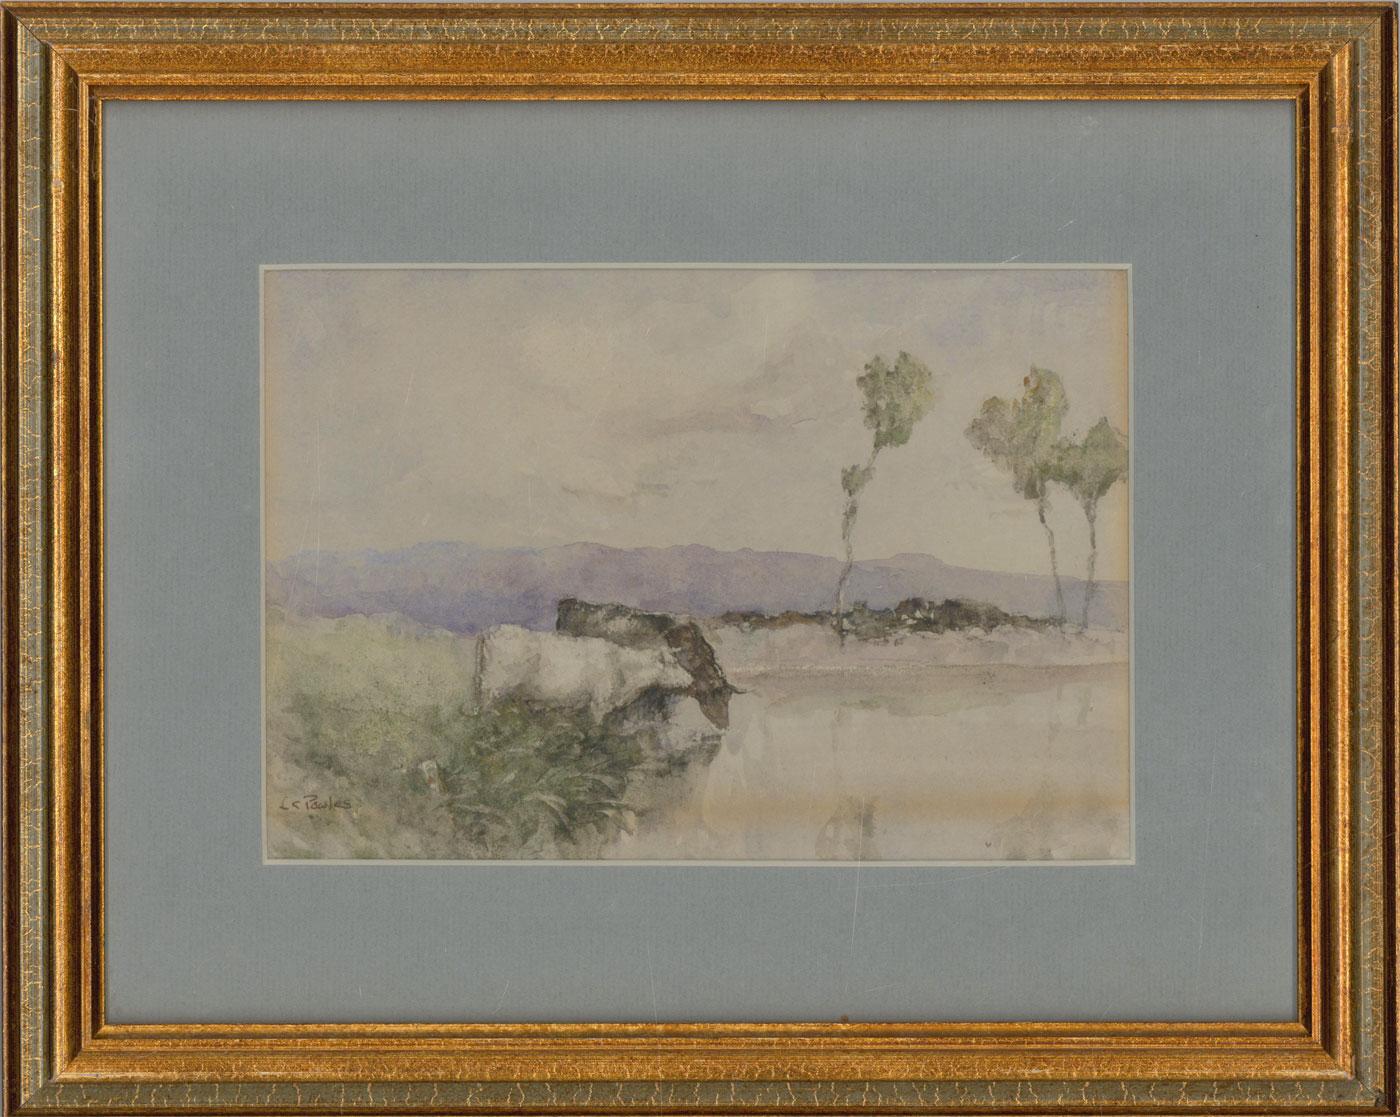 Unknown Landscape Art - Lewis Charles Powles RBA (1860-1942) - Signed Watercolour, Cattle at a Lake